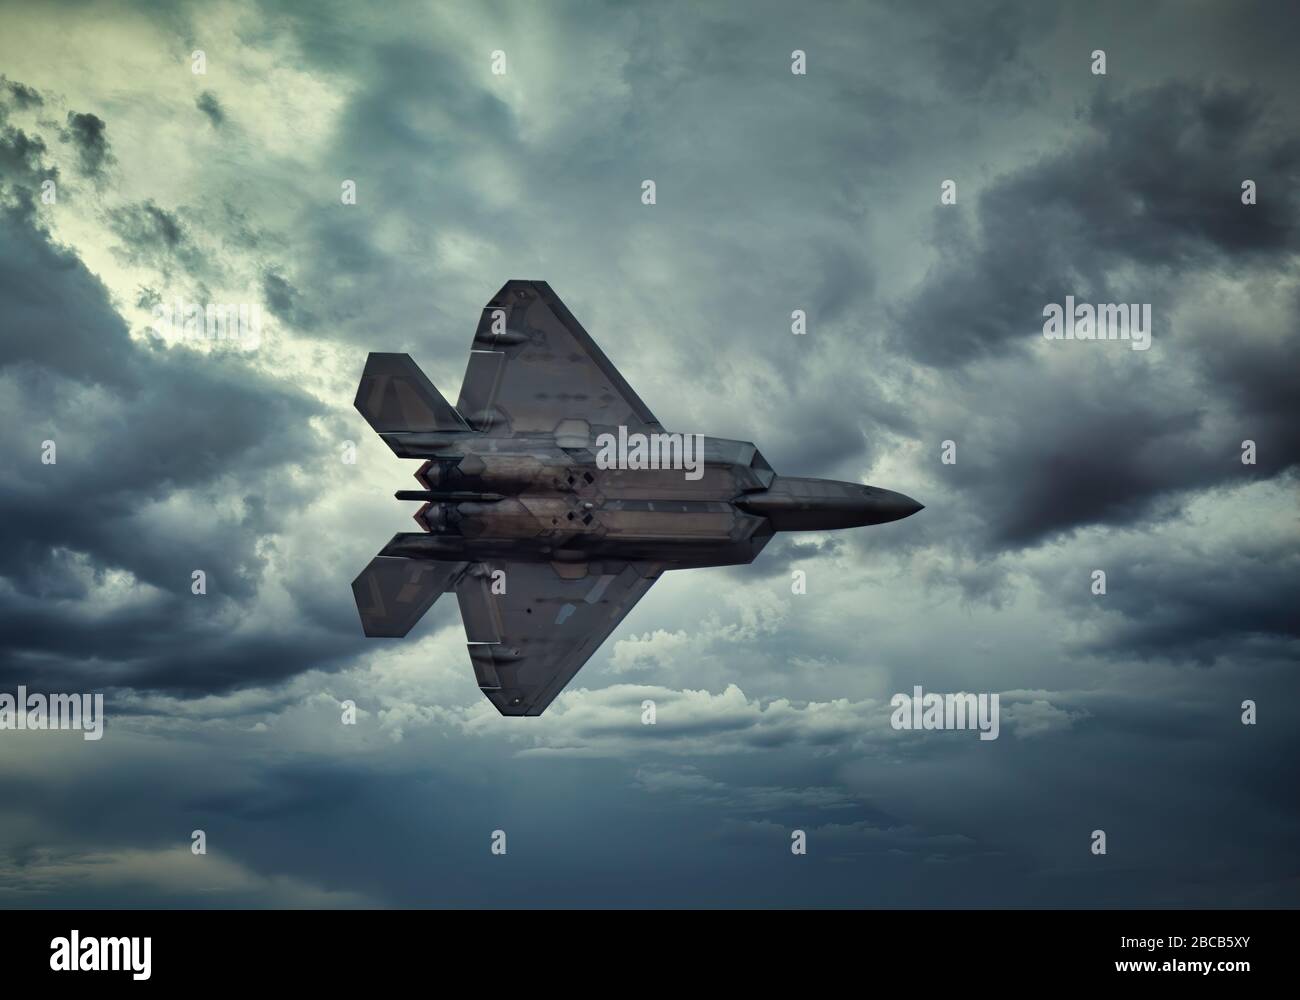 United States Air force F-22 Raptor Fighter Jet Stock Photo